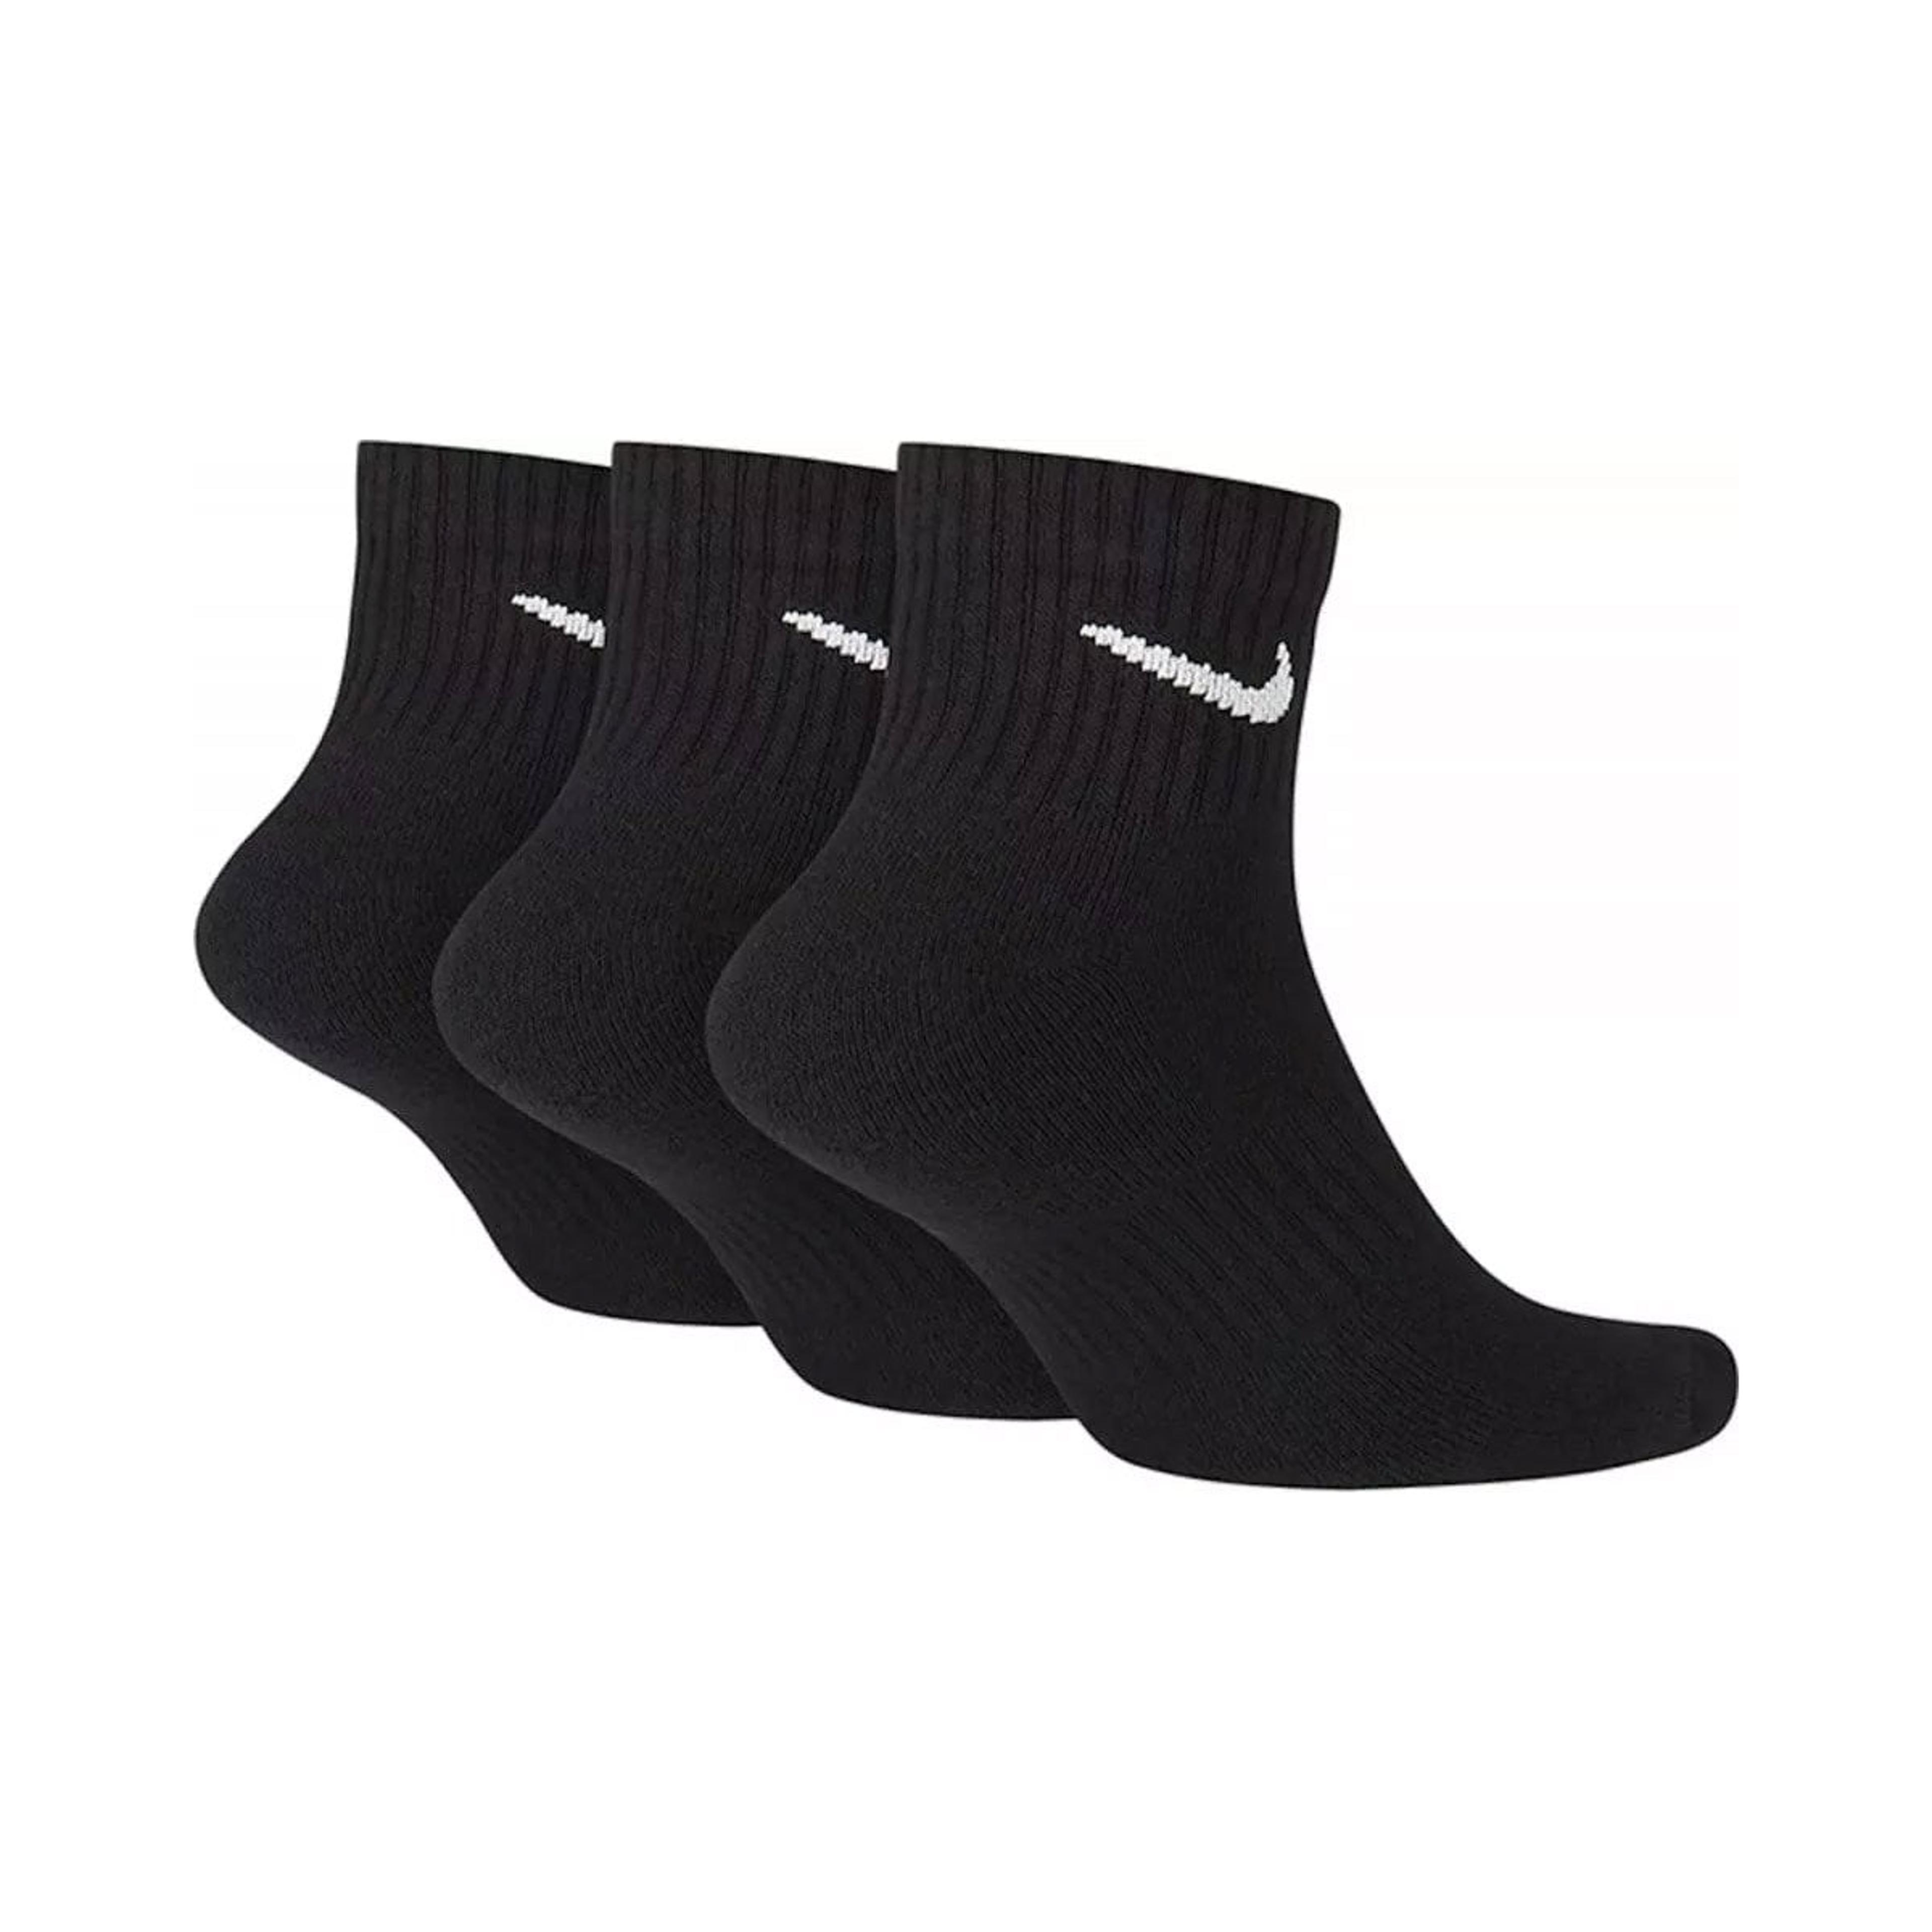 Alternate View 2 of Nike Cushioned Training Ankle Socks (3pairs)